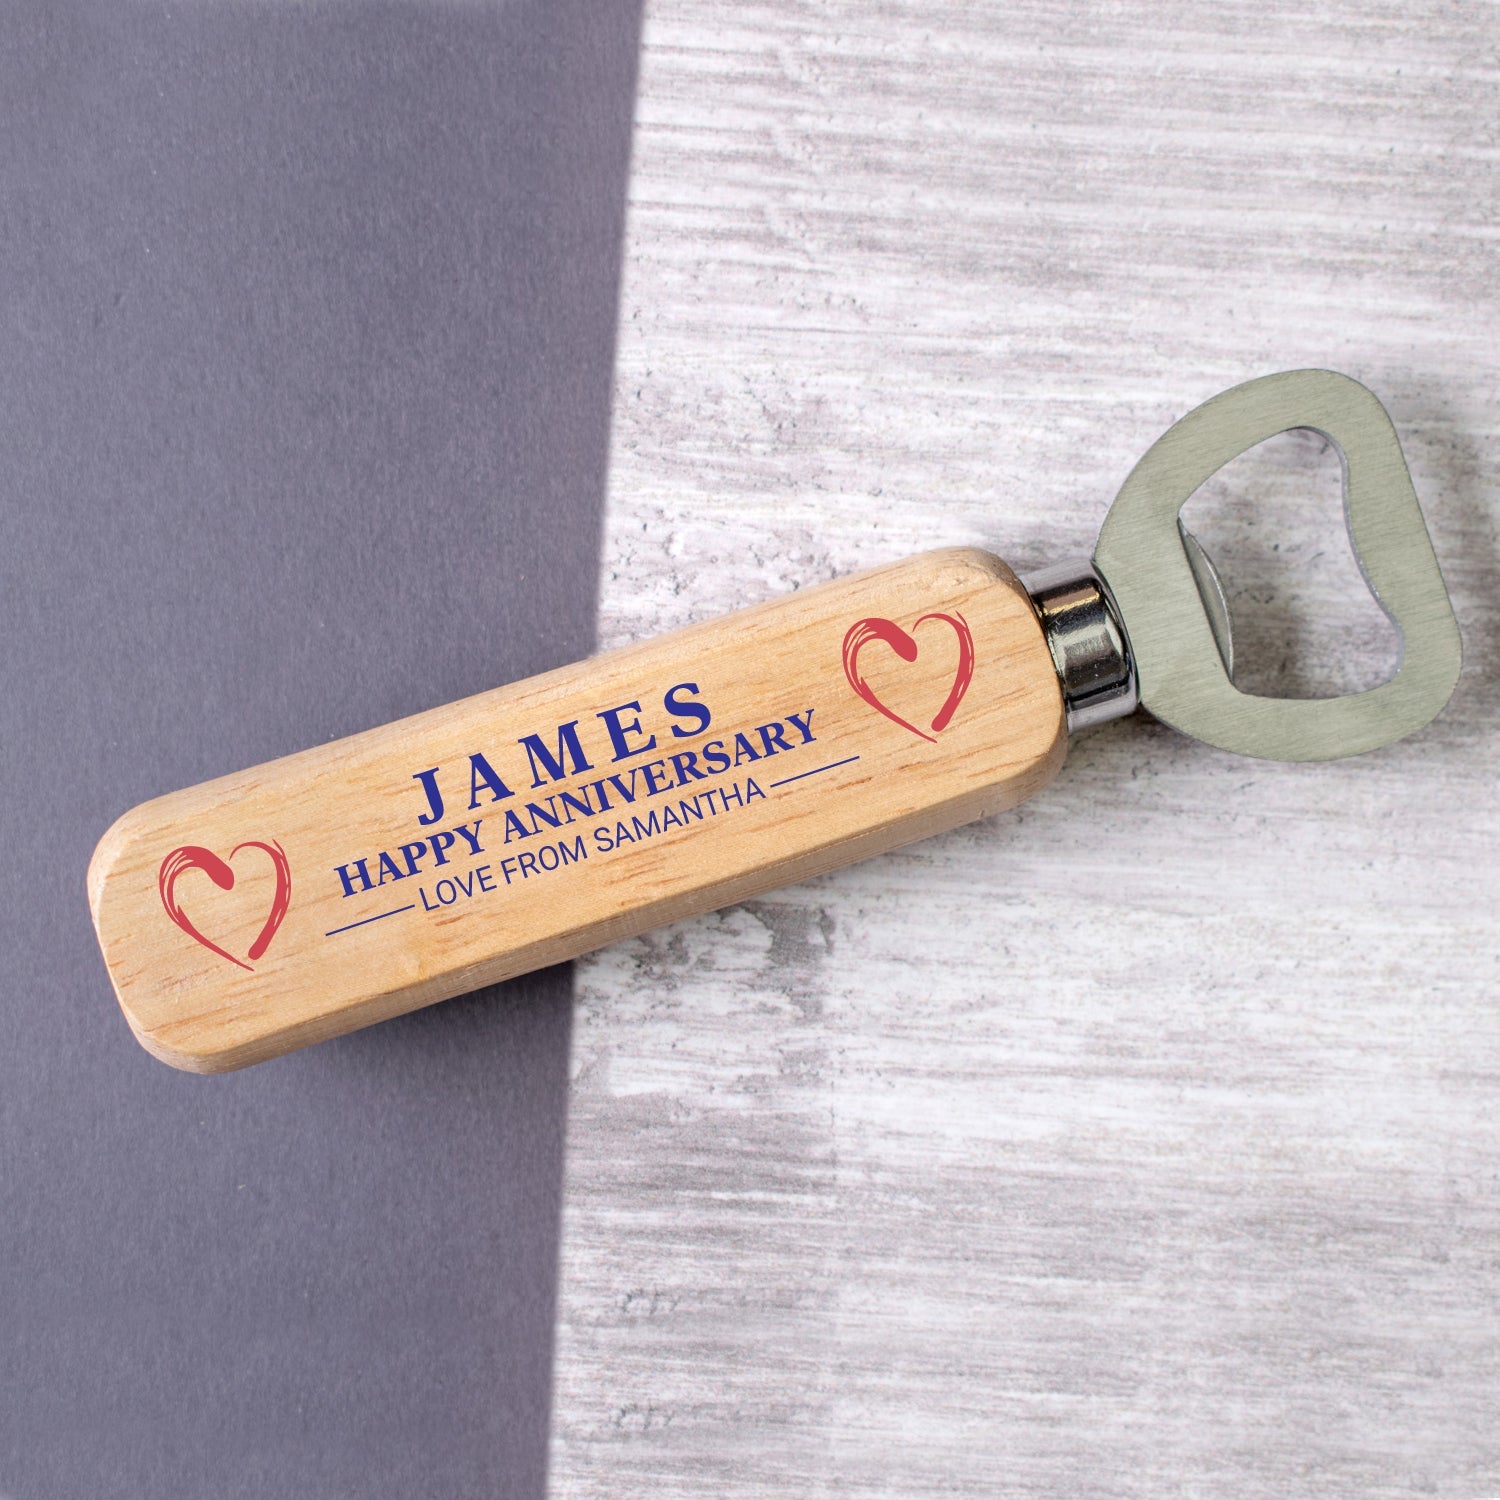 Personalised Engraved Wooden Bottle Opener - Heart Anniversary Special